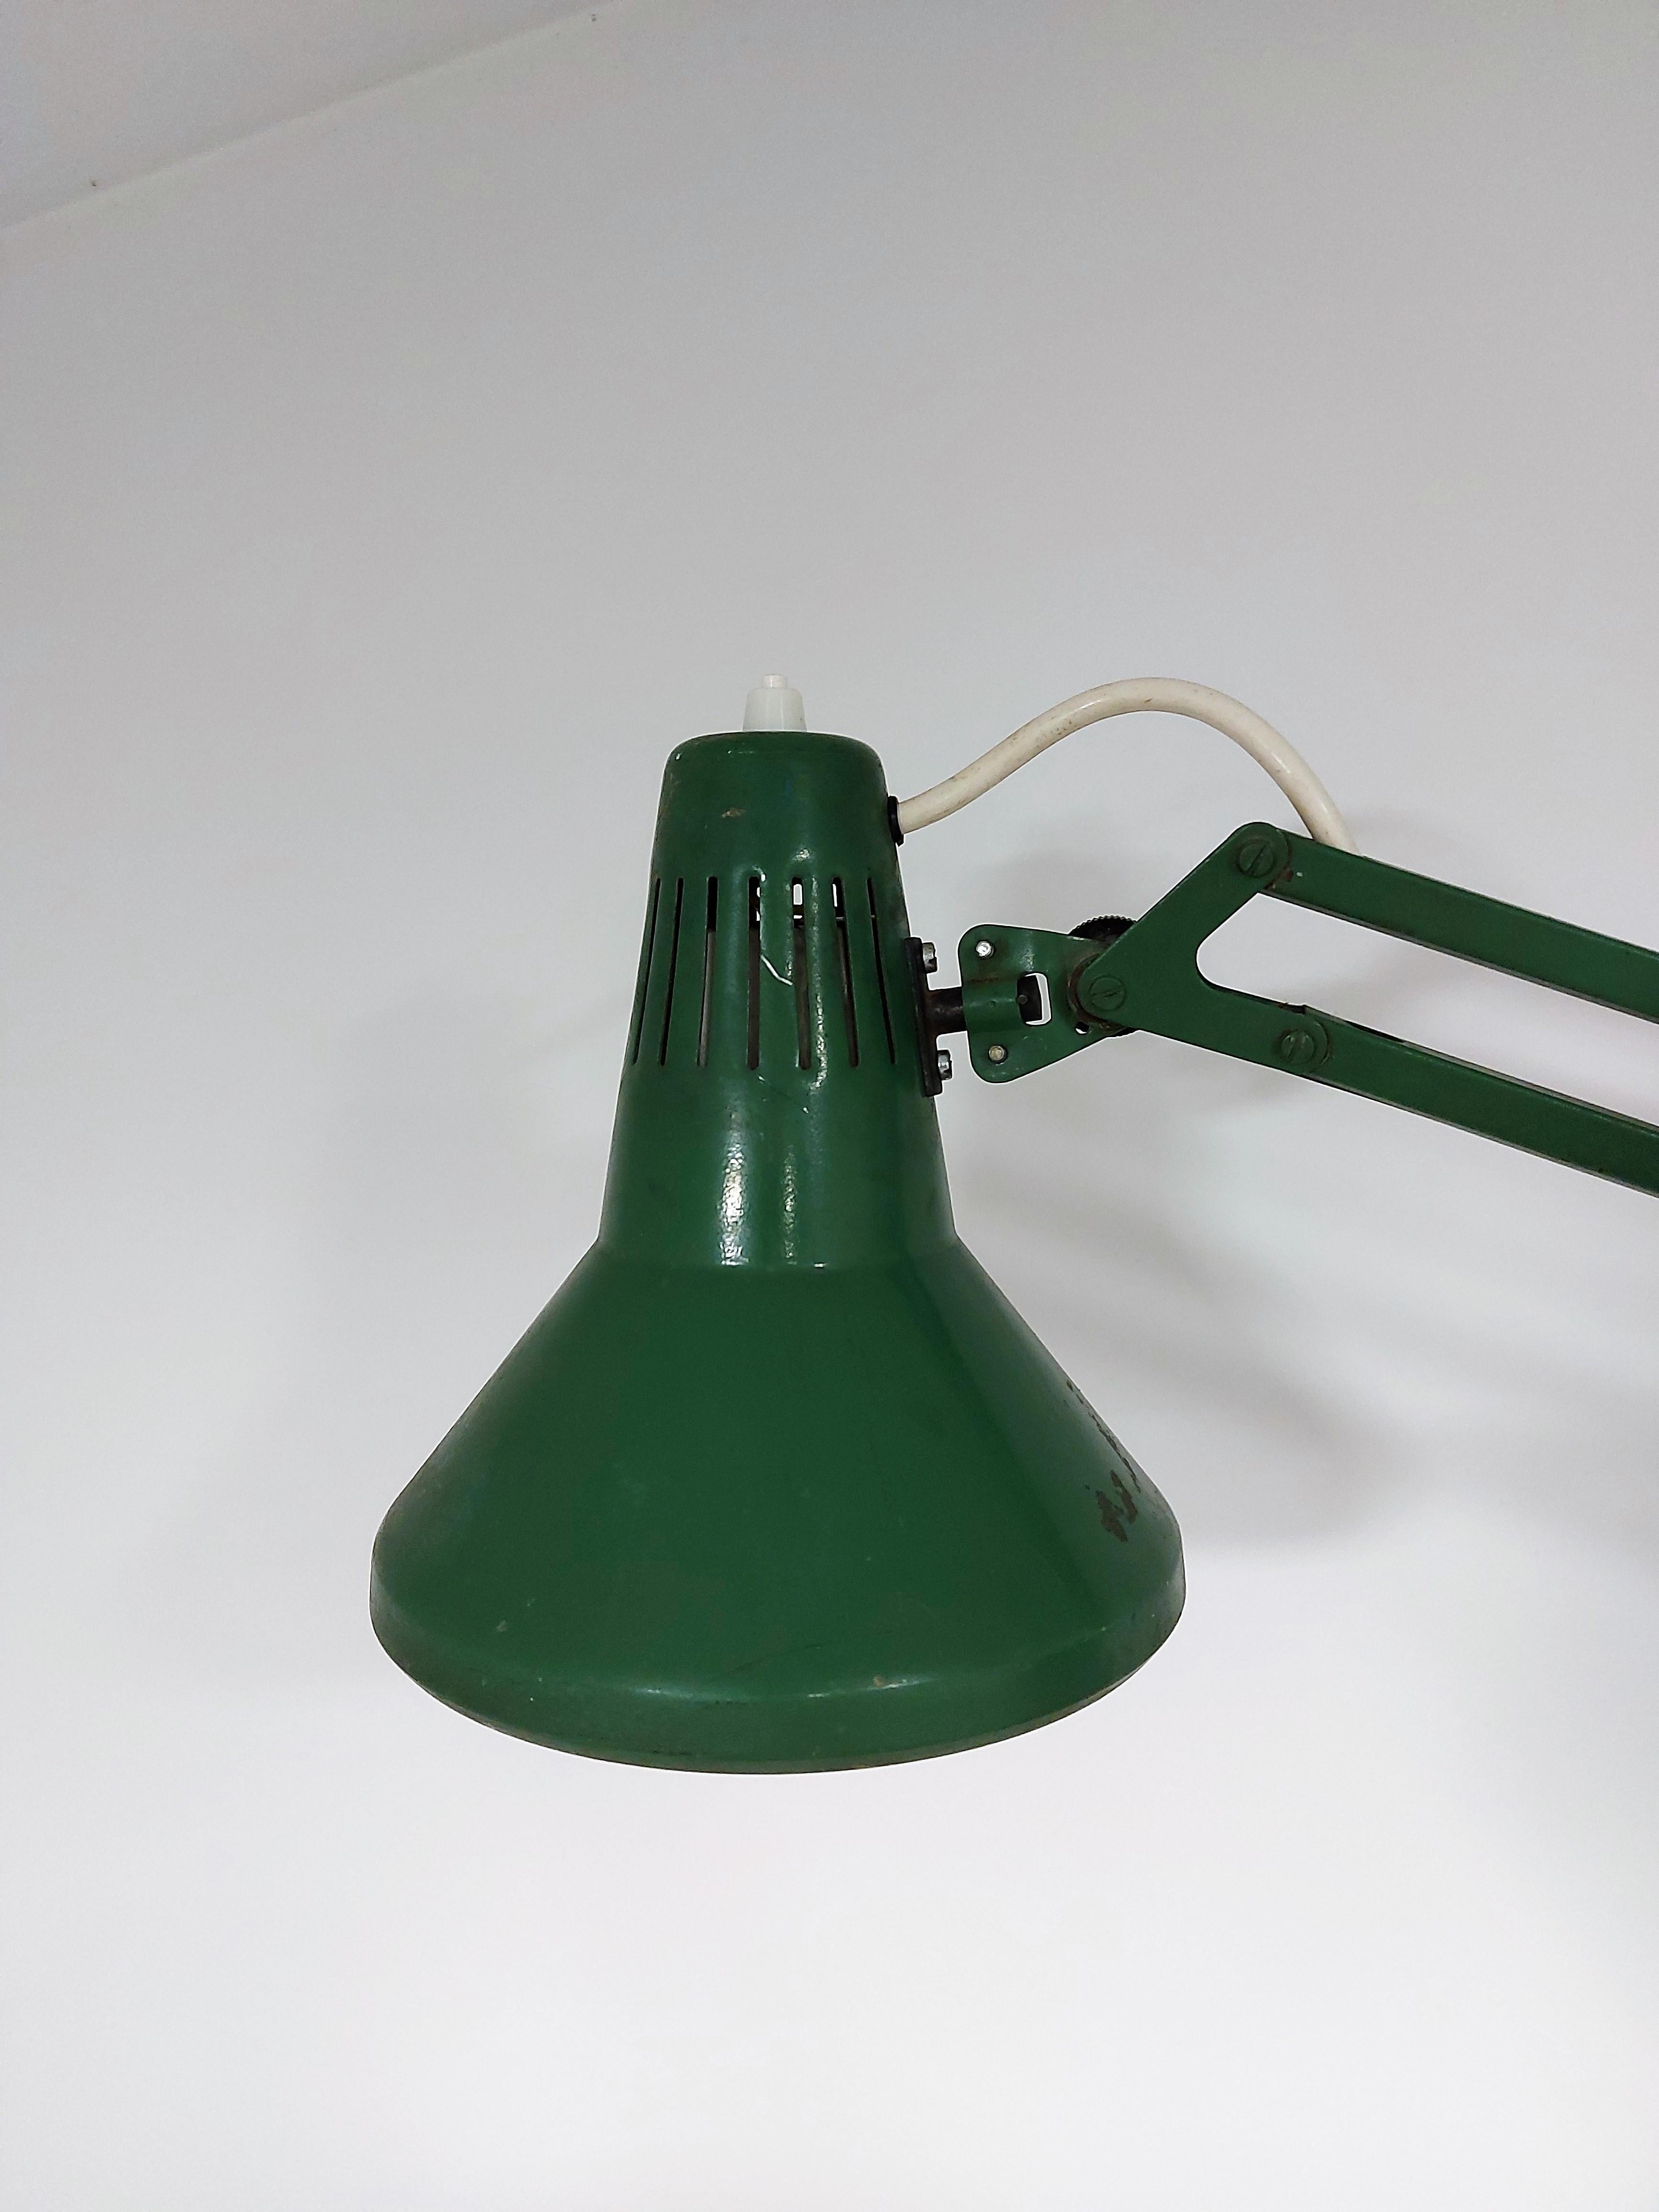 Architect Adjustable Green Swing-Arm Desk Lamp with Metal Shade
Period: 1970s
Country of Manufacturer: Slovenia/Yugoslavia
Colour: green
Material: metal
Condition: good original vintage condition, fully functional
H - 100 cm, D - 60 cm
Lamp